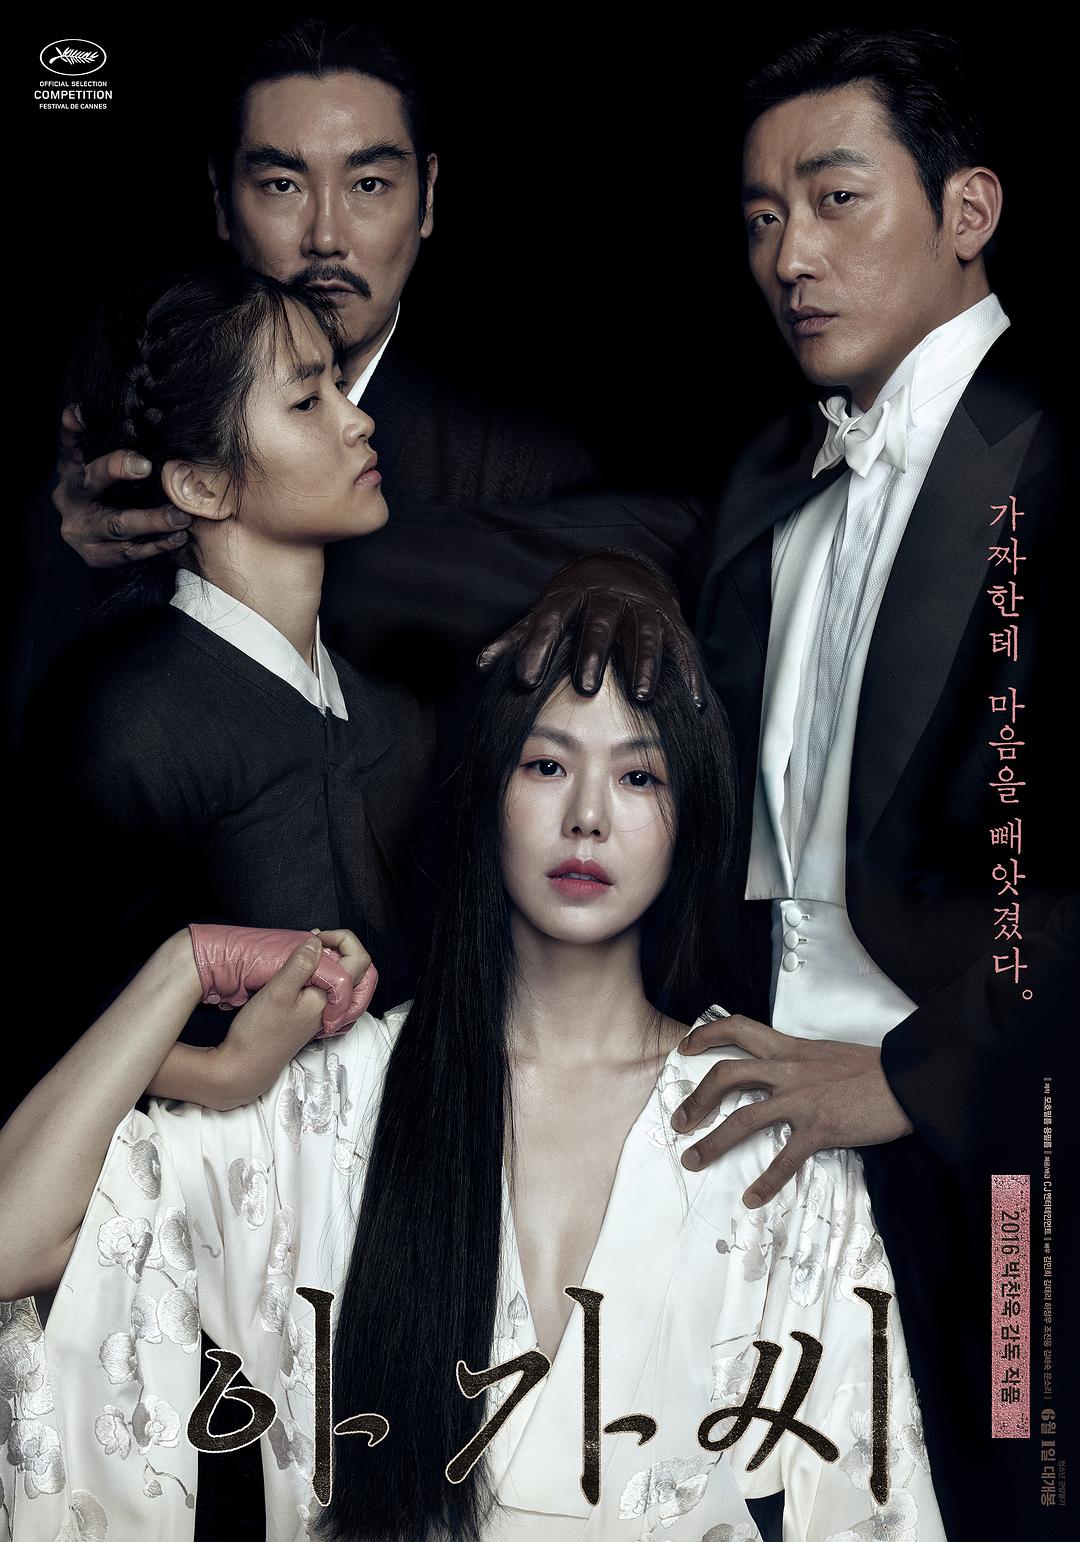 С The.Handmaiden.2016.LIMITED.EXTENDED.1080p.BluRay.x264-USURY 14.21GB-1.jpeg